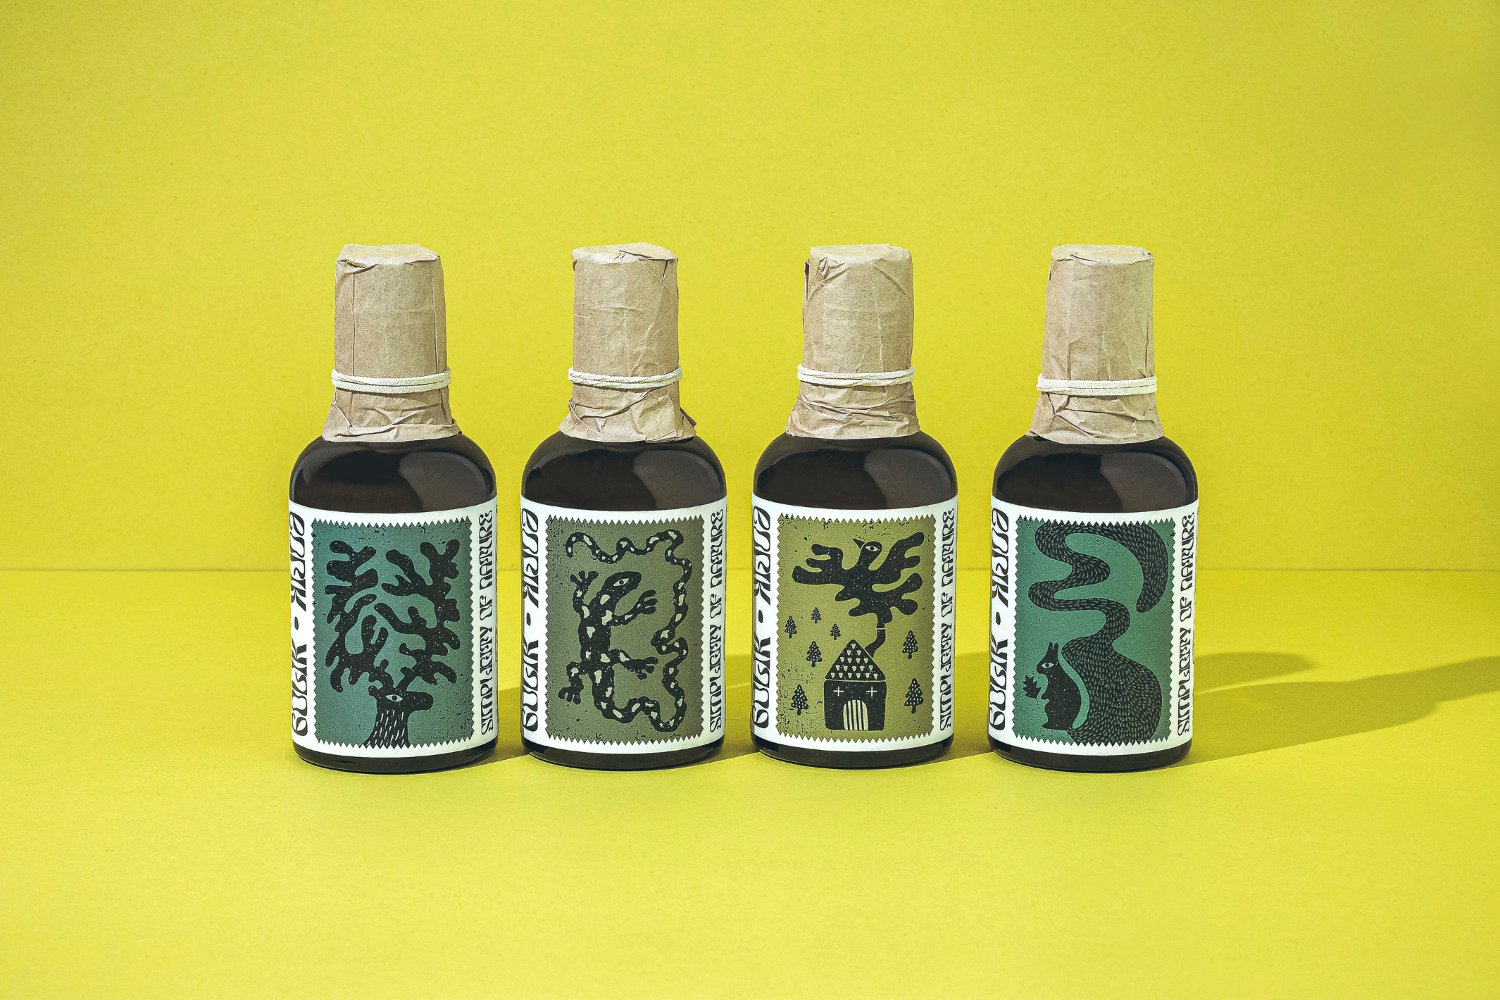 Surreal, Evocative Bottle Design Gives This Pumpkin Seed Oil All the Allure of a Eastern European Folktale